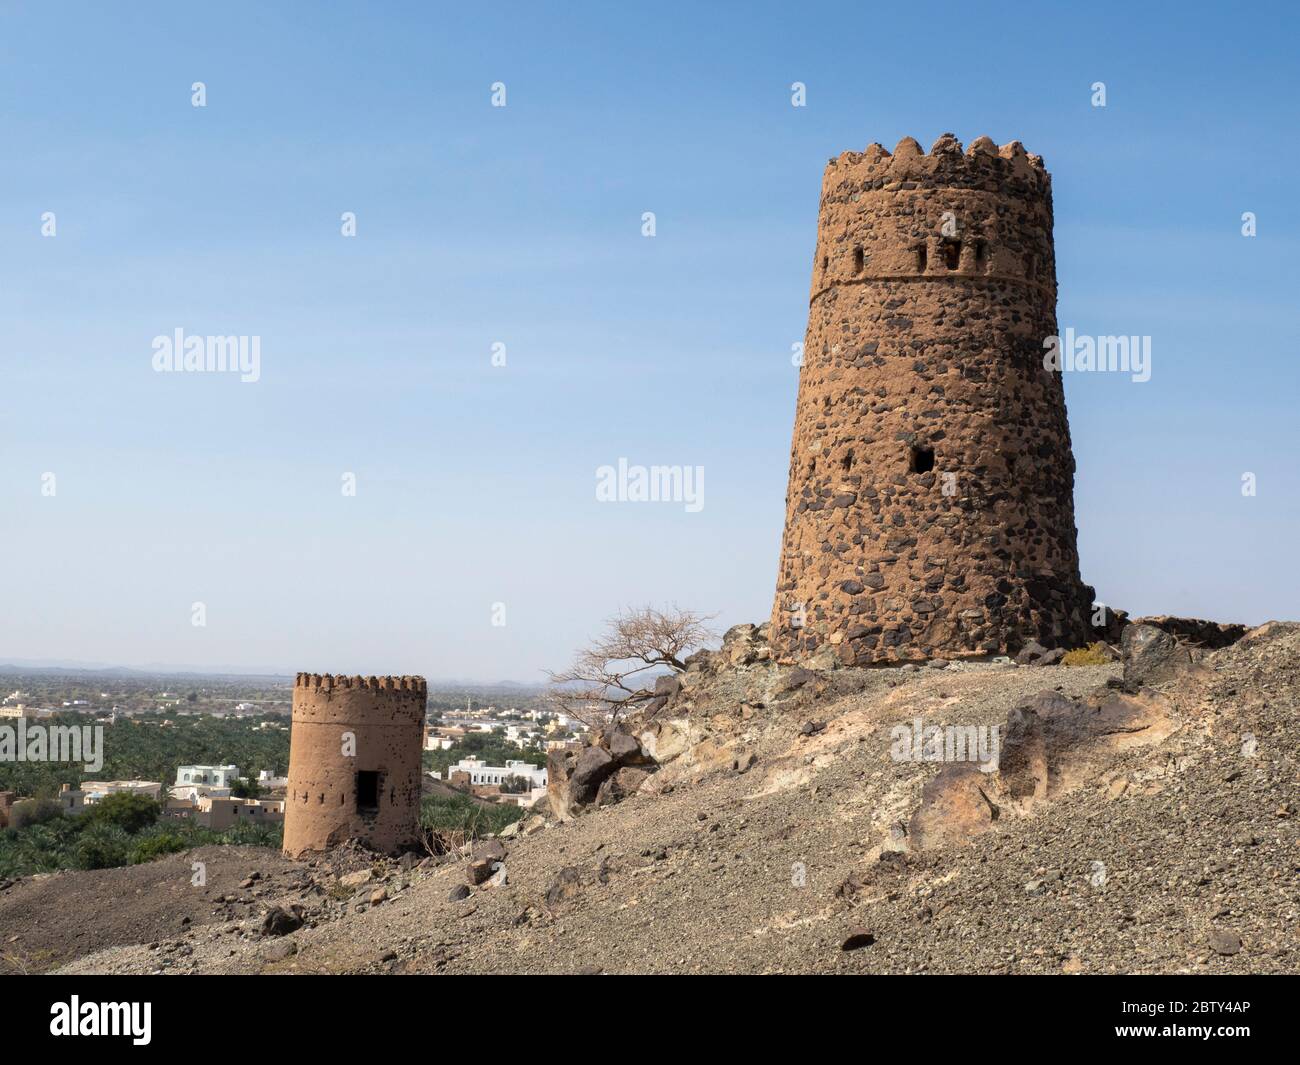 Remains of the mud and clay watch towers in the village of Mudayrib, Sultanate of Oman, Middle East Stock Photo